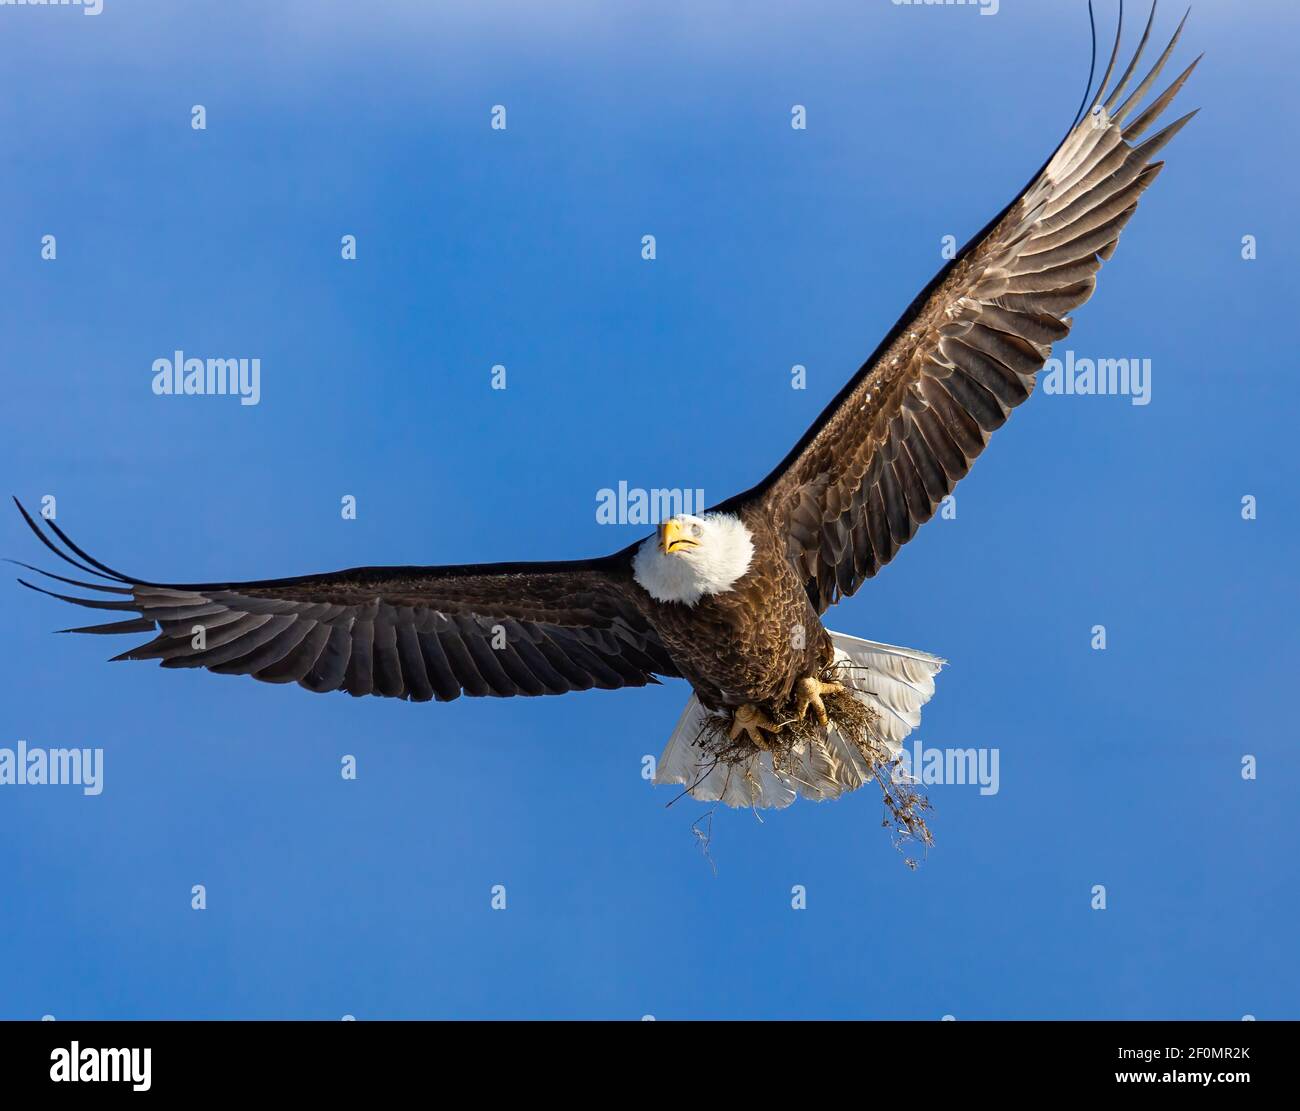 Adult Bald eagle in flight with nest bedding Stock Photo